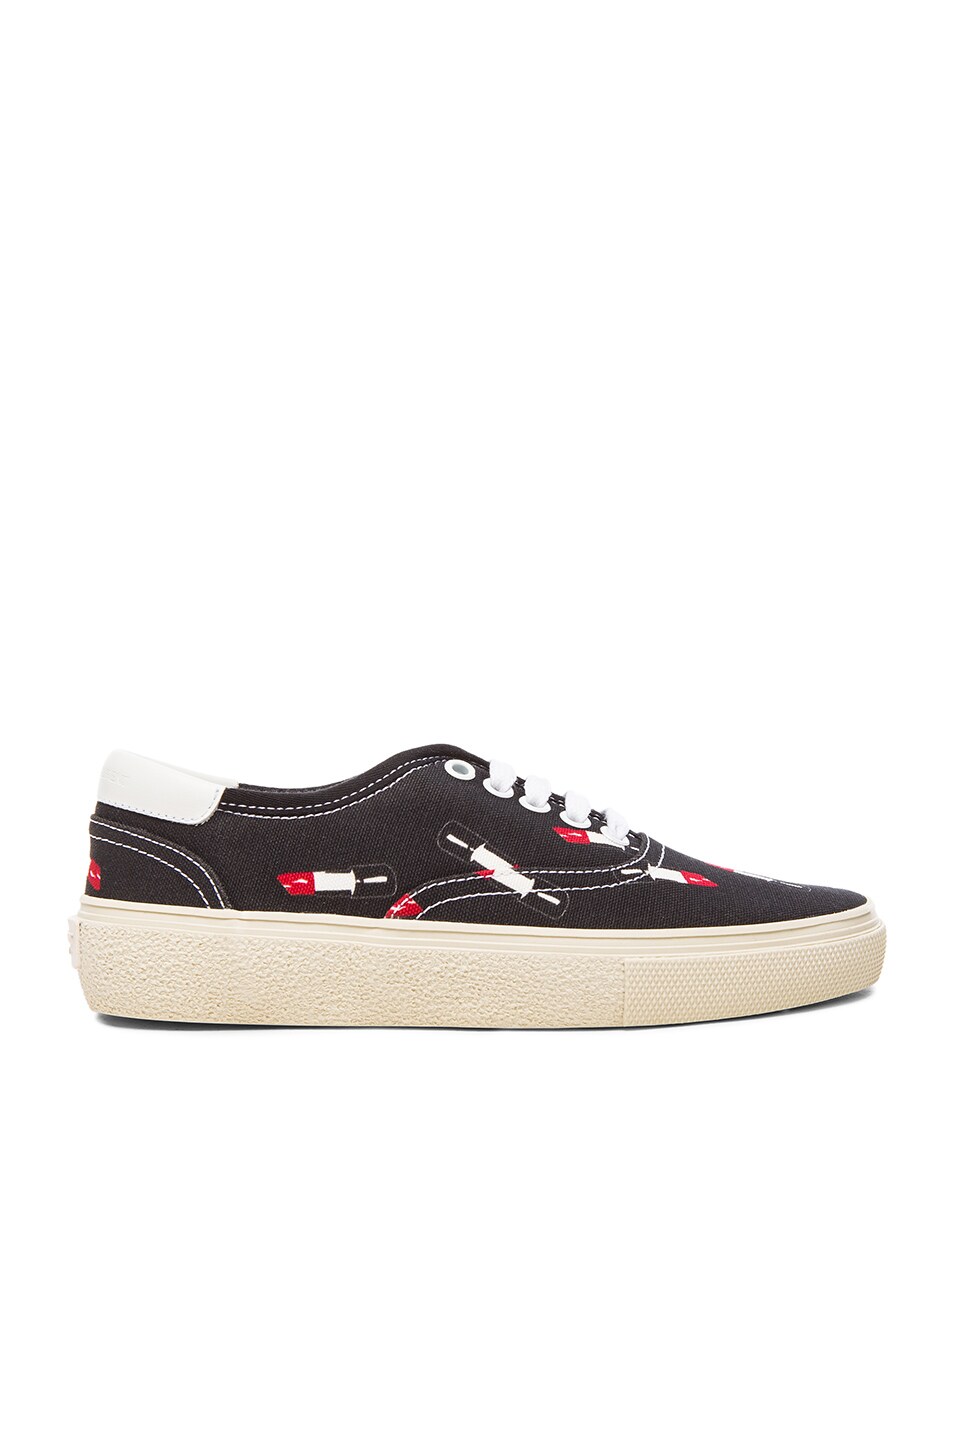 Image 1 of Saint Laurent Lipstick Print Canvas Sneakers in Black, Red & White